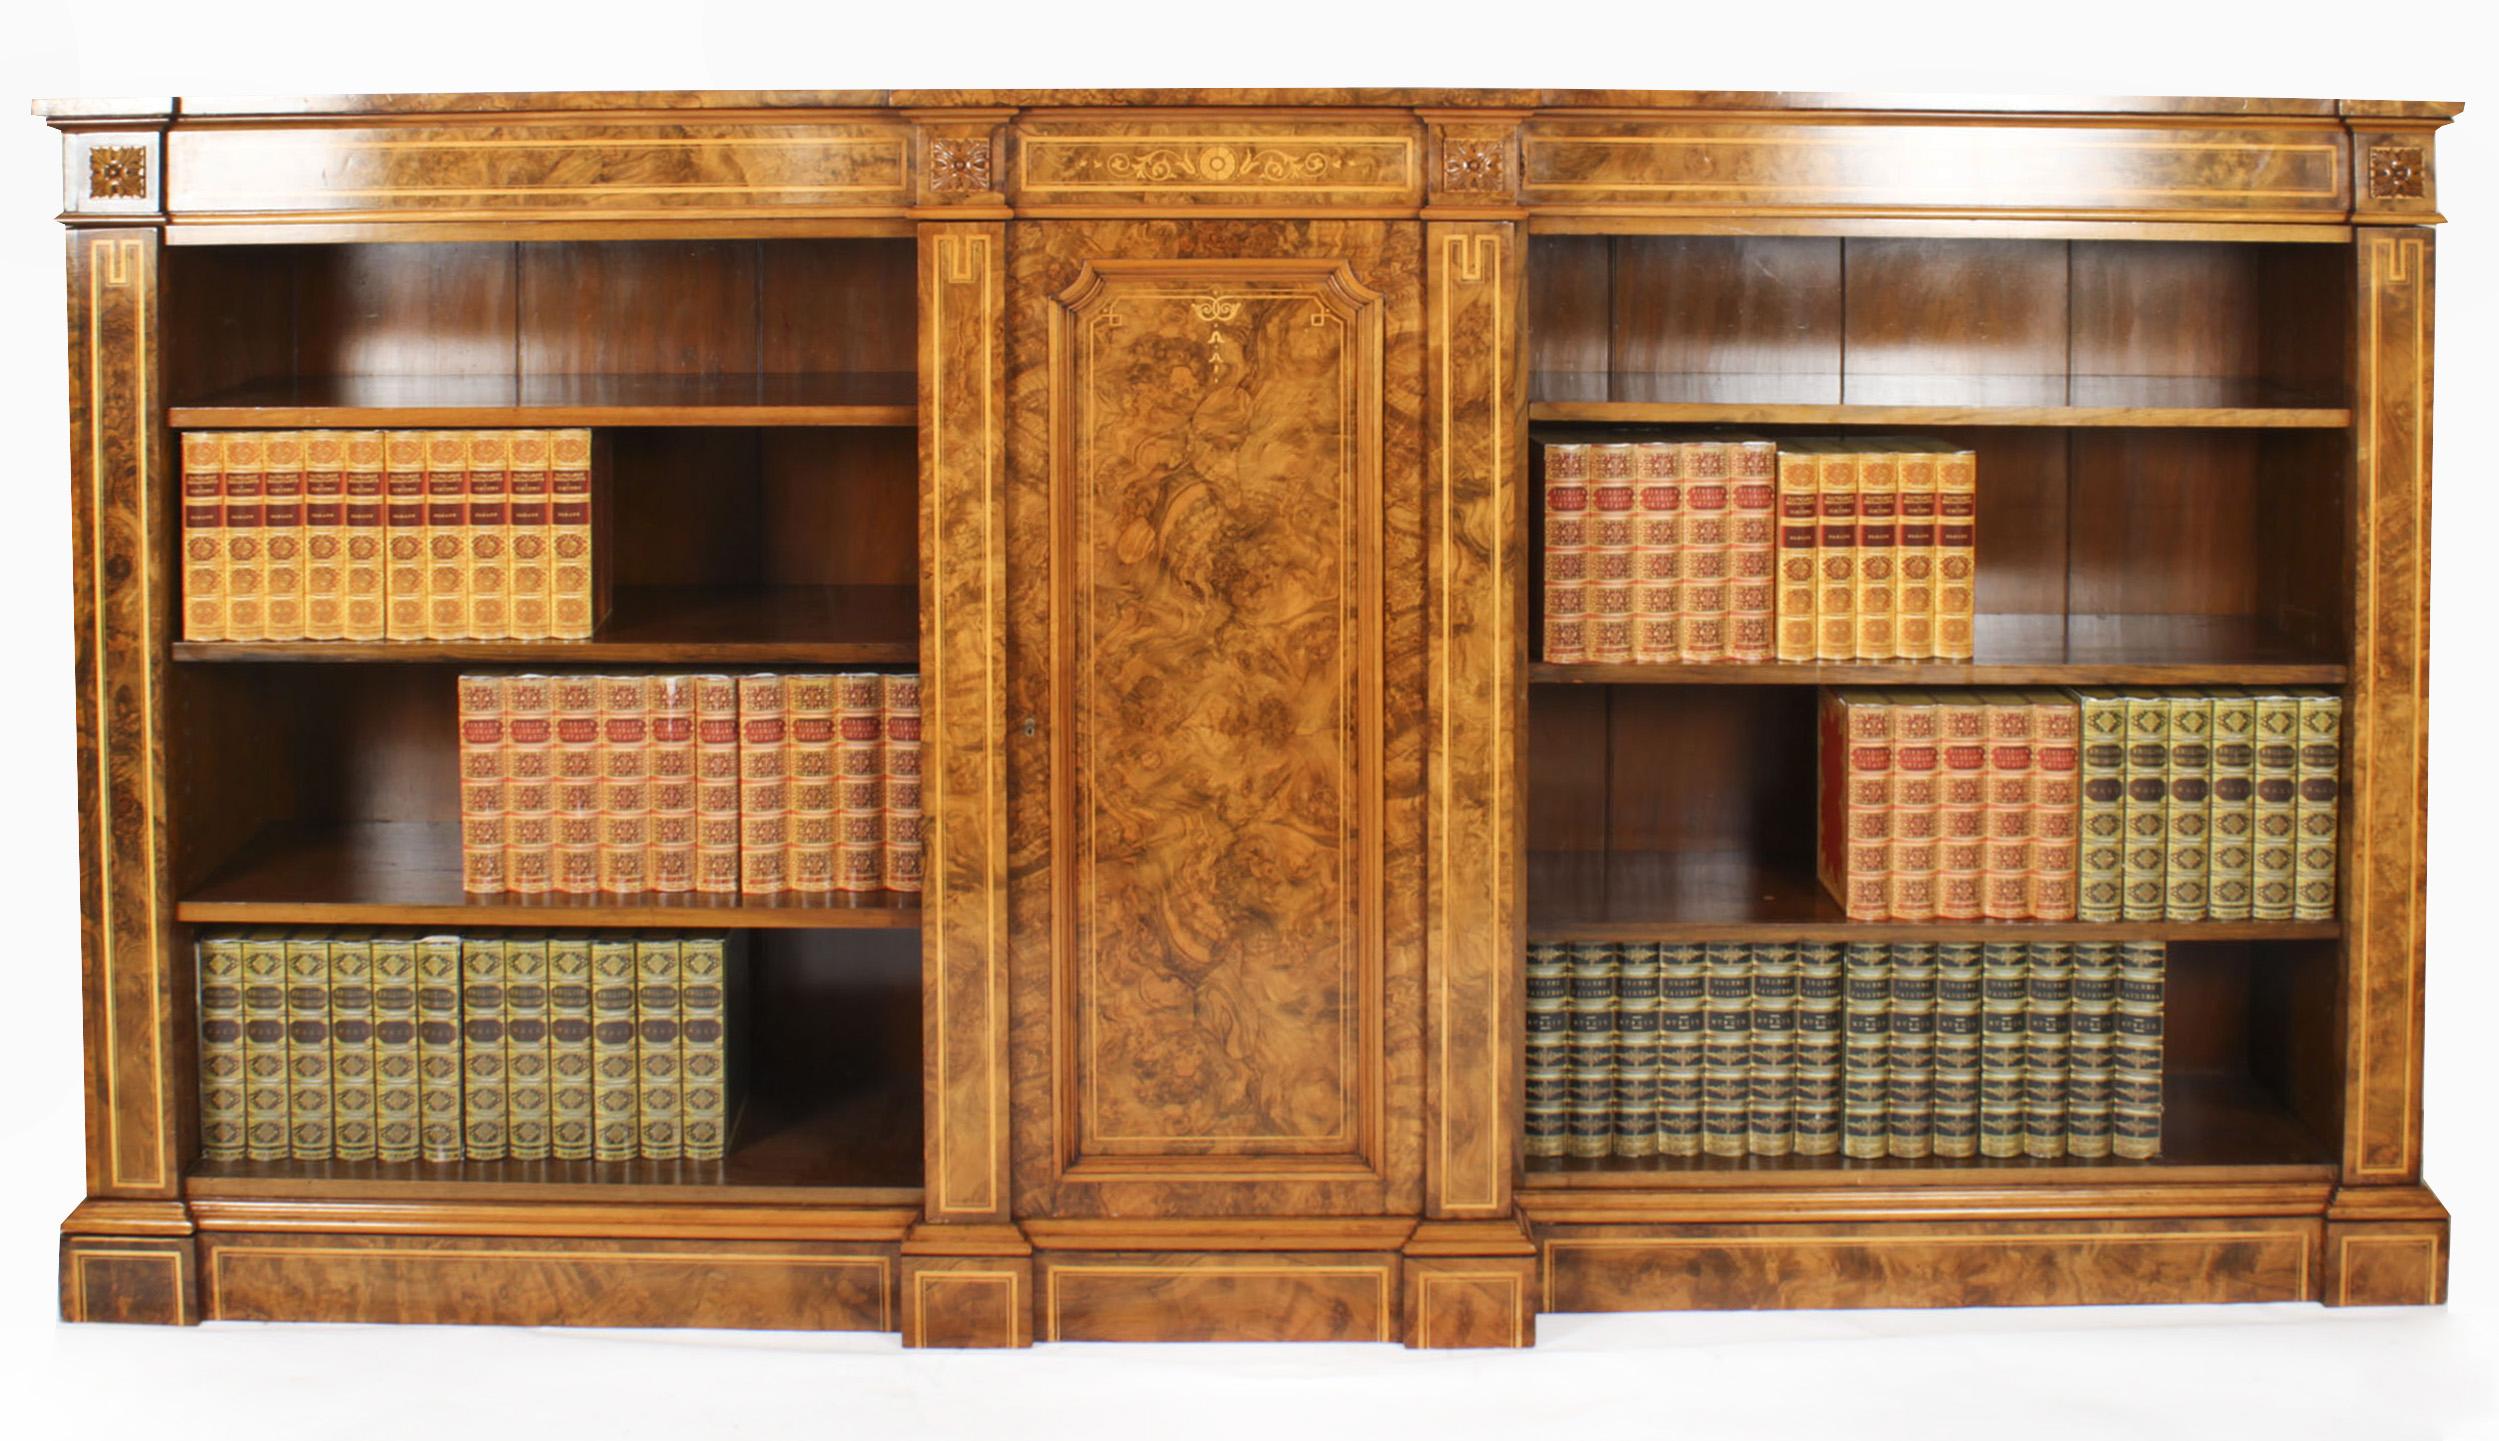 This is a superb antique Victorian burr walnut and marquetry inlaid breakfront open bookcase, circa 1860 in date.
 
The bookcase features beautiful satinwood crossbanding and four carved anthemion plaques, the breakfront central cupboard door